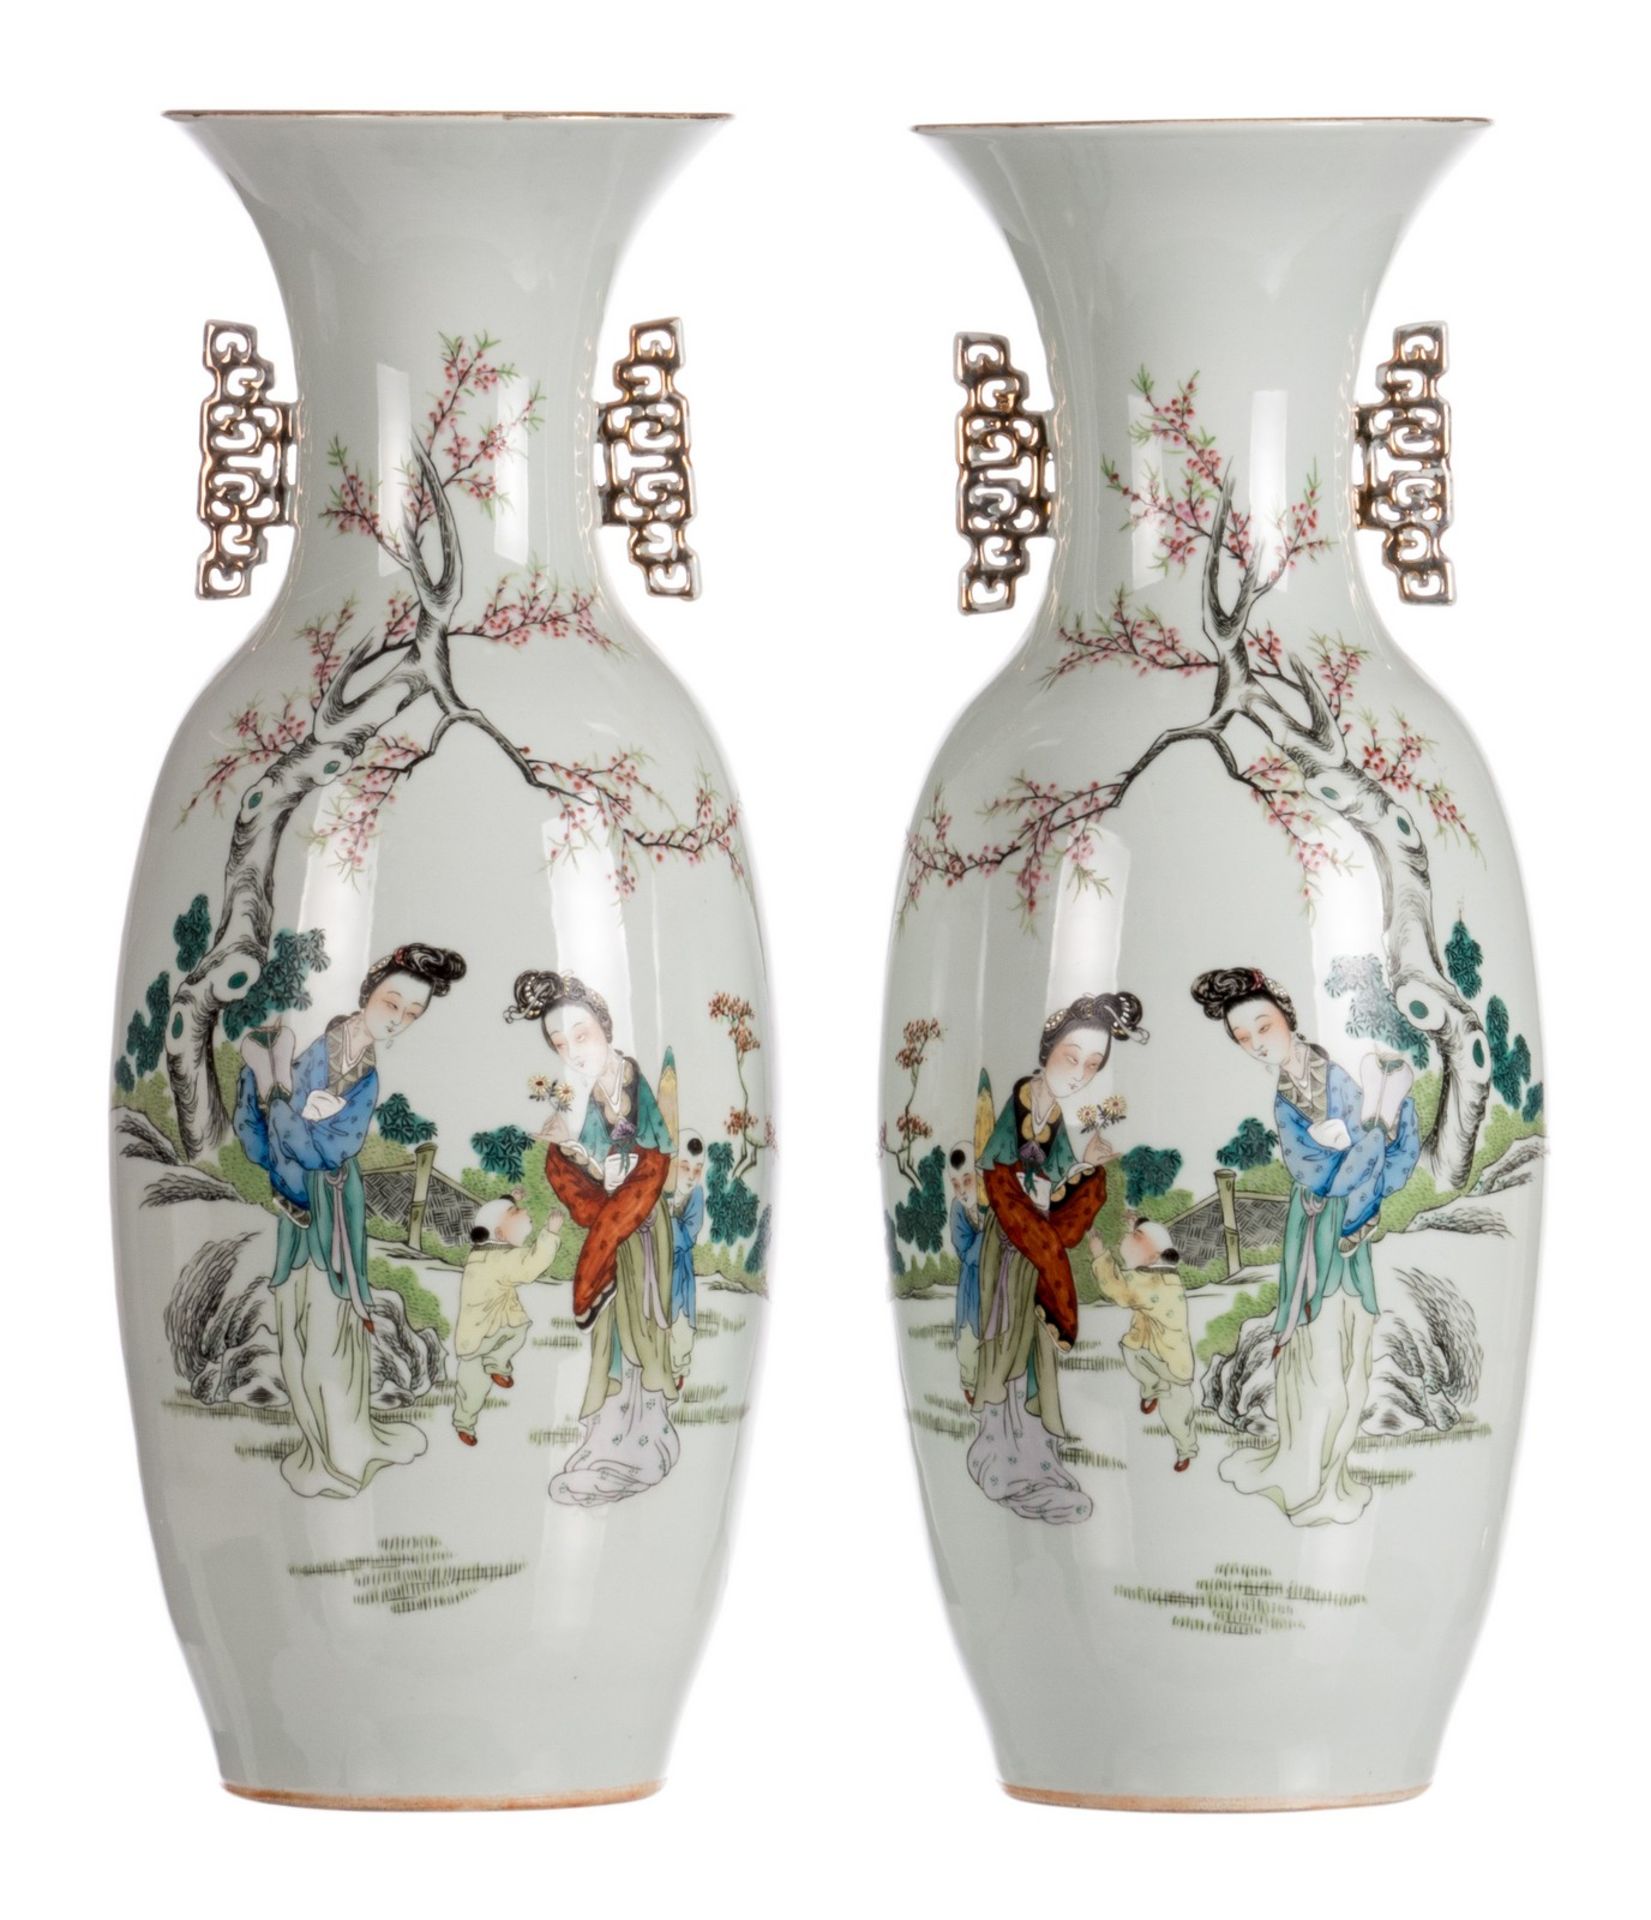 A pair of Chinese polychrome decorated vases with court ladies and children in a garden and